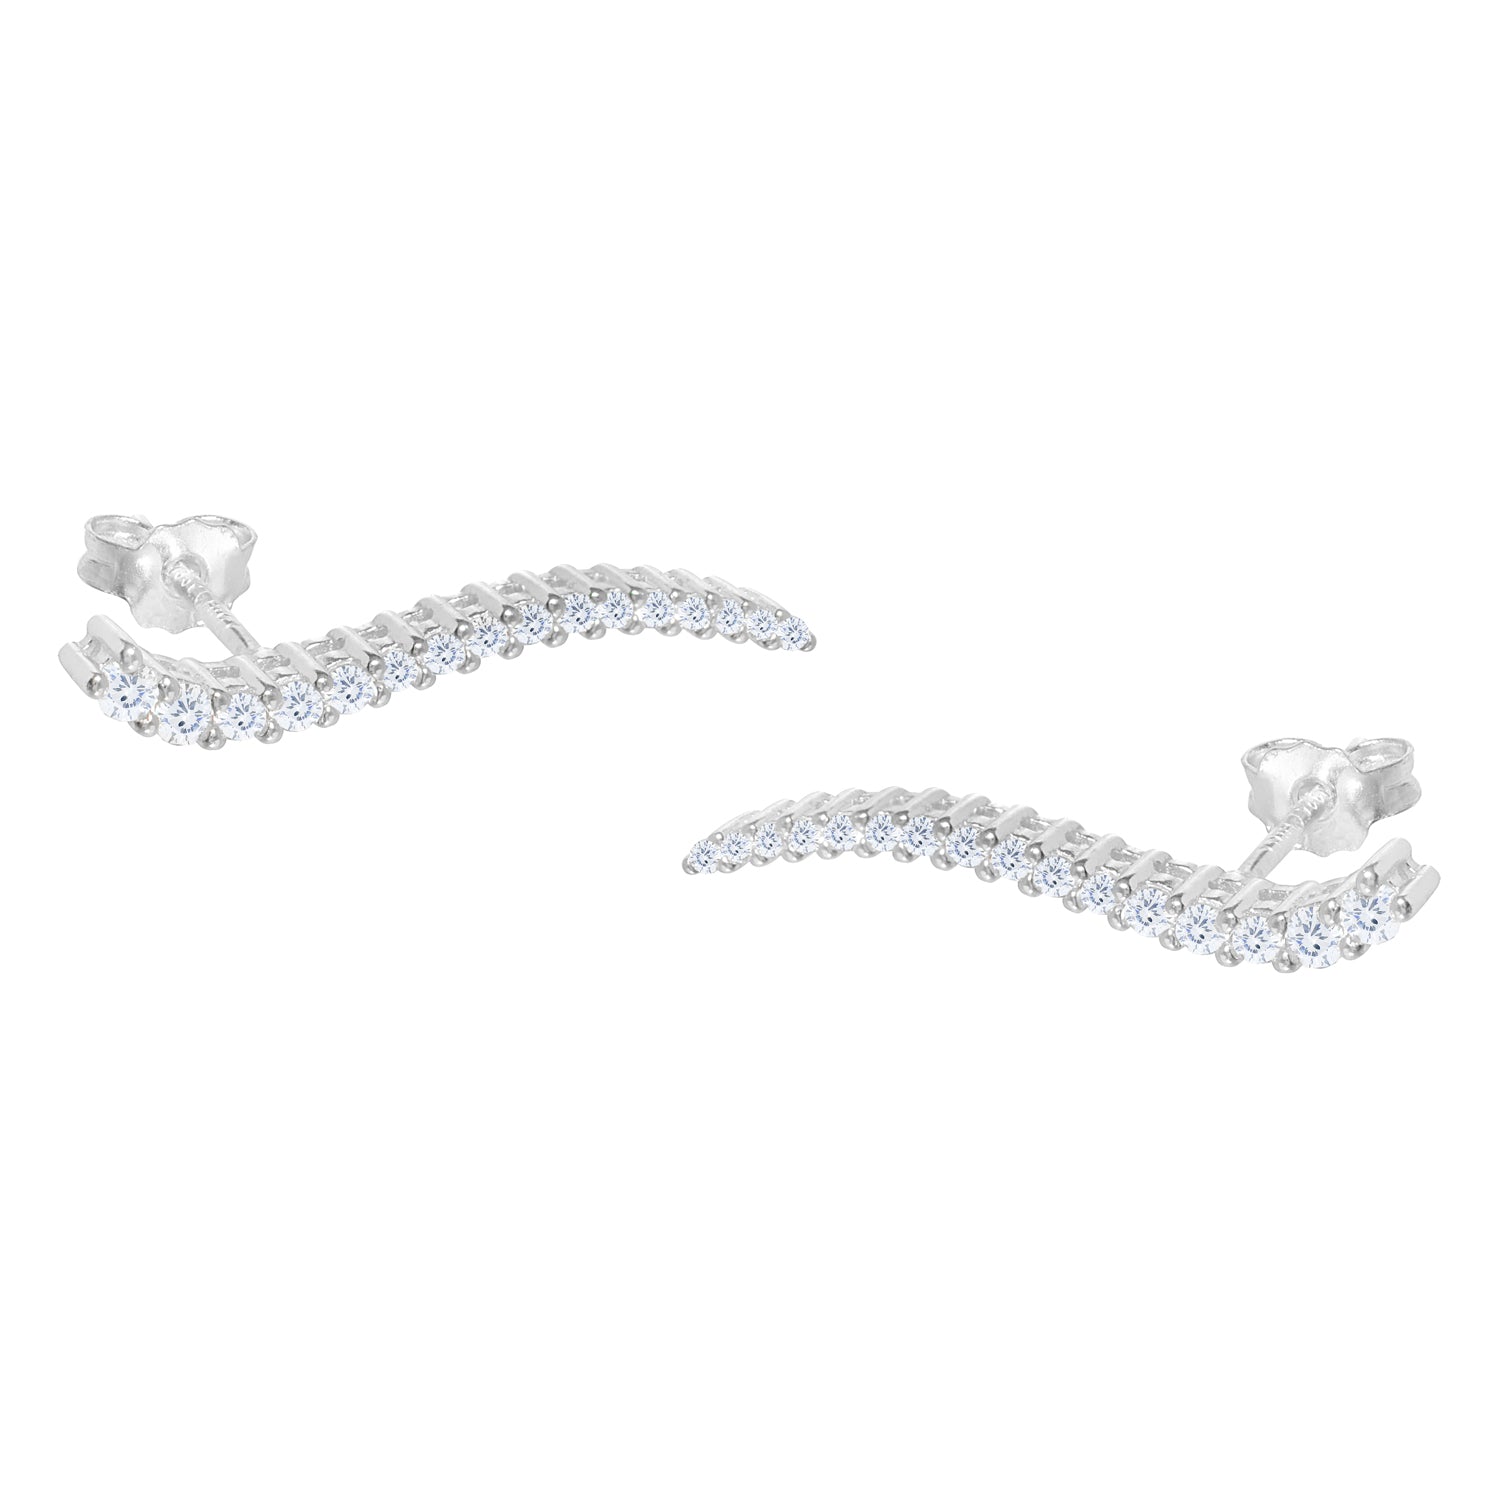 Isabella Sterling Silver Ear Climber Earrings with CZ Crystals